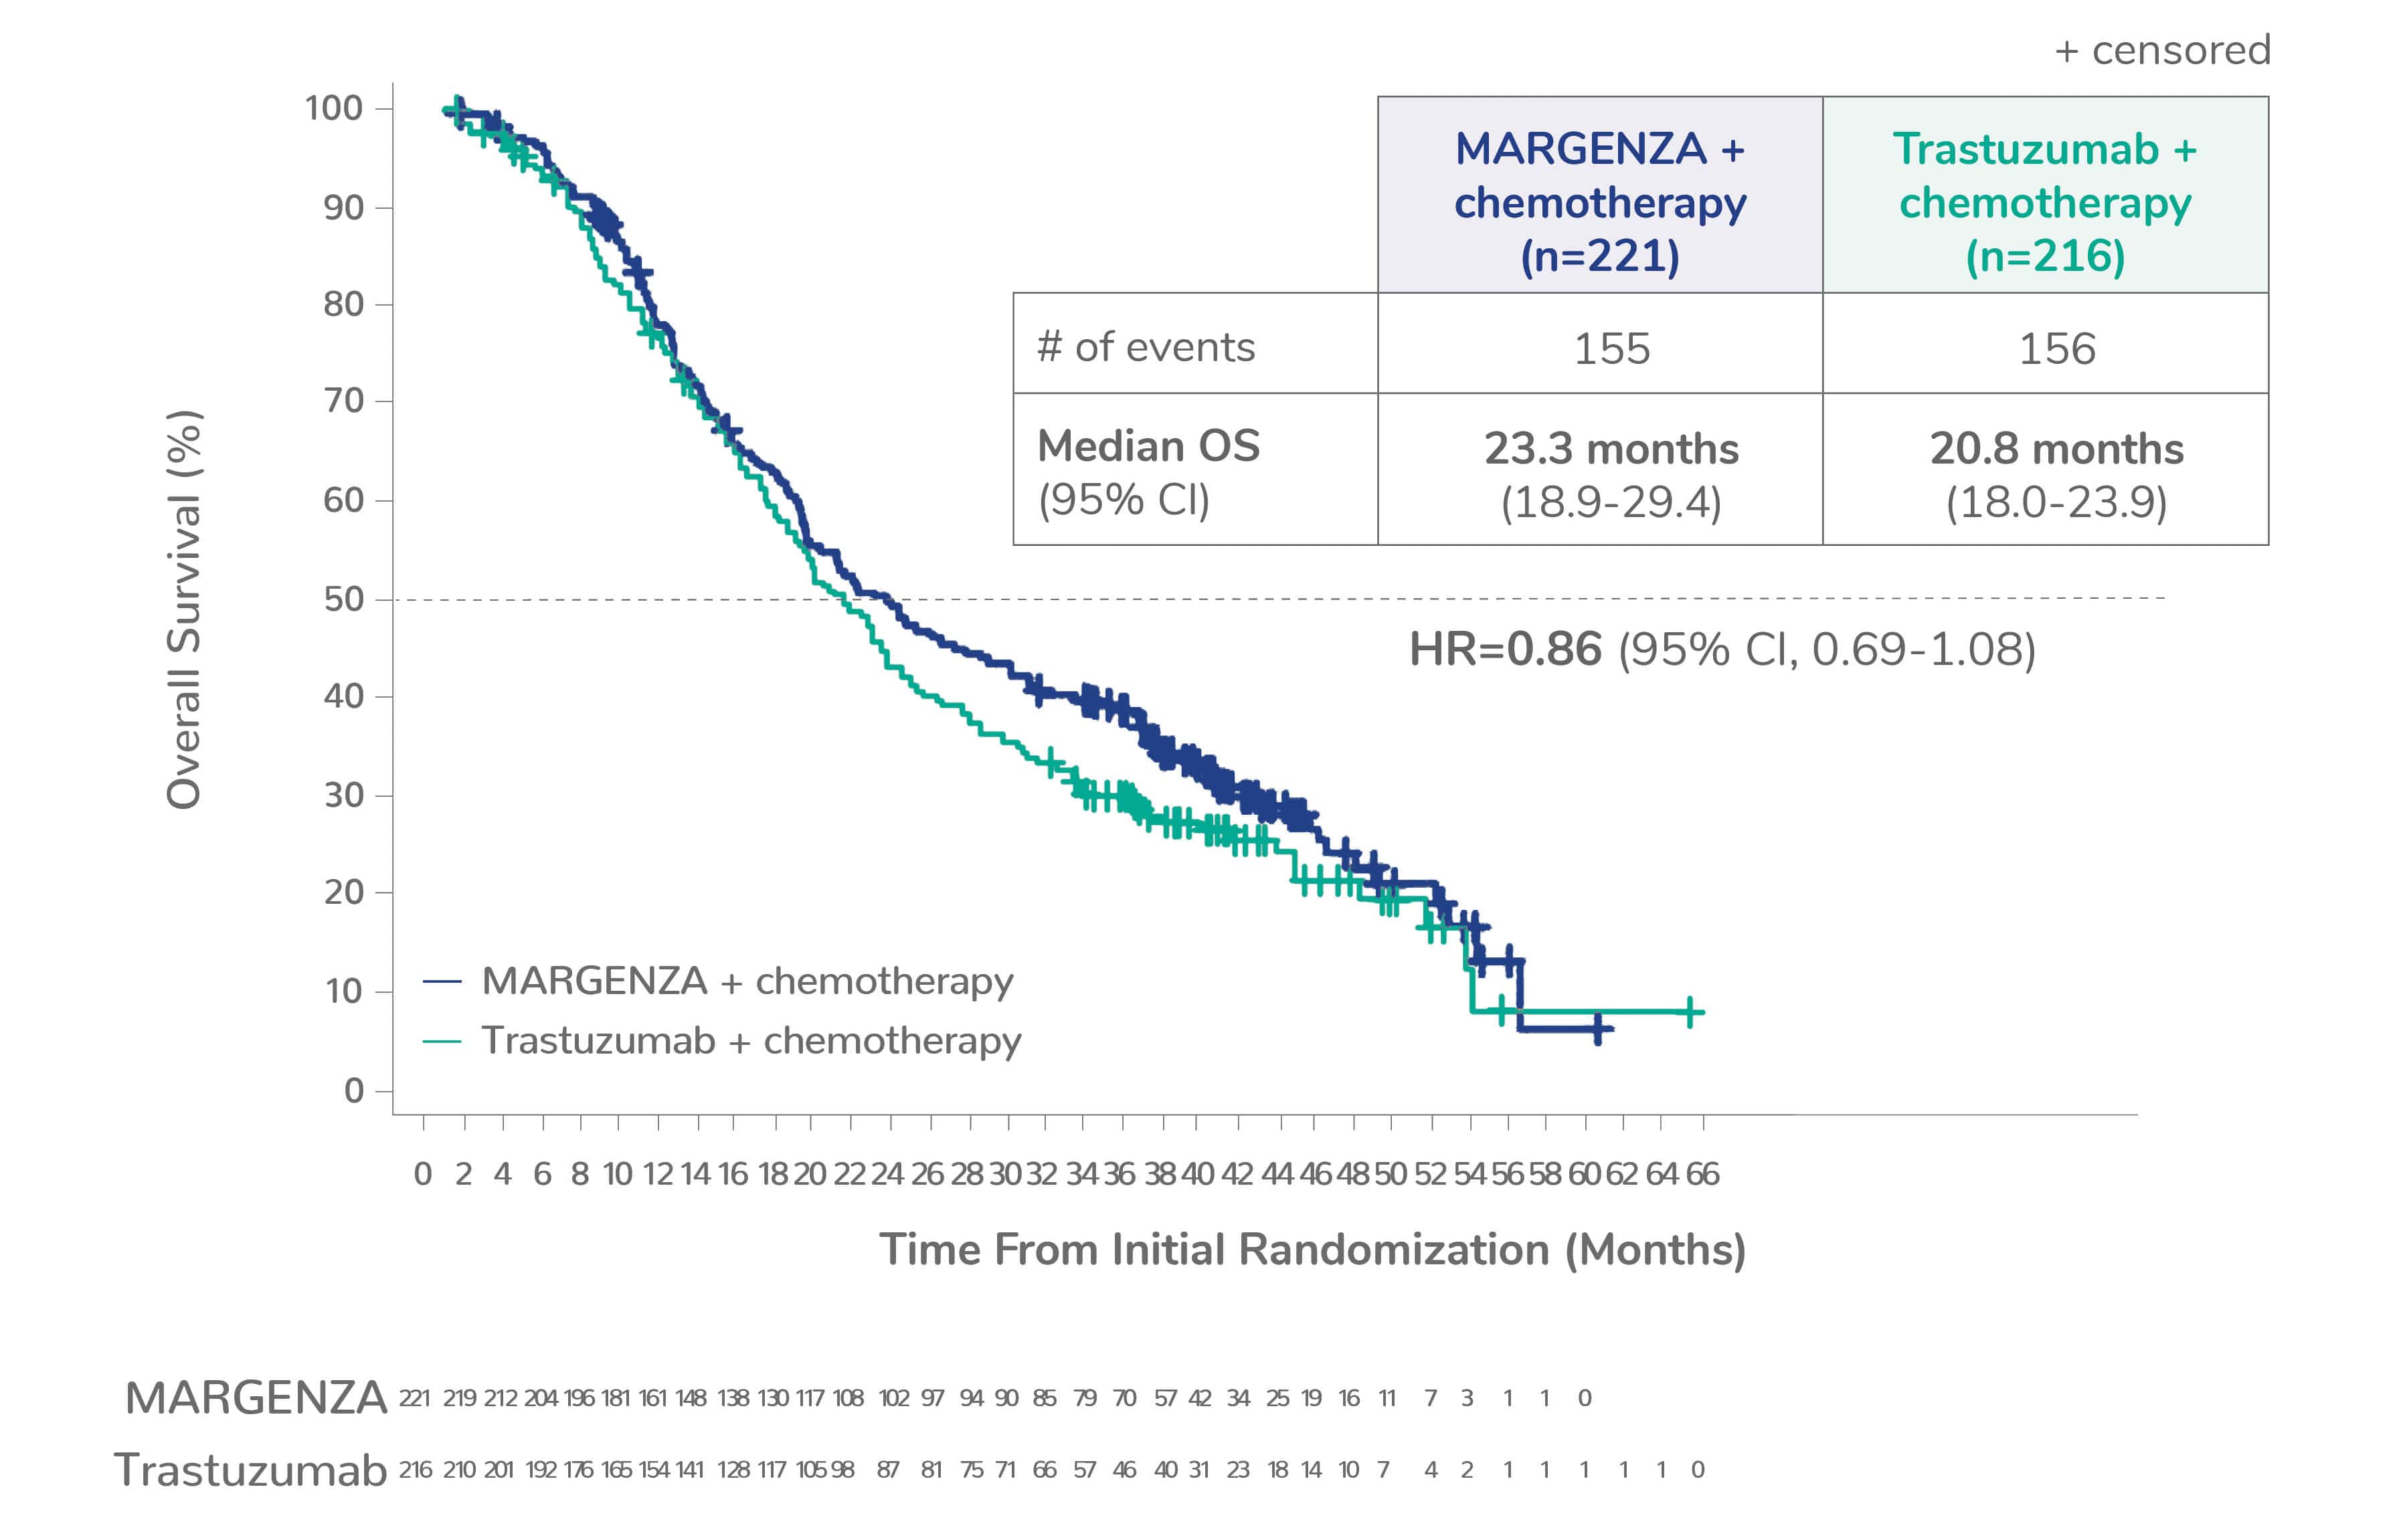 Kaplan Meyer curve showing median overall survival for CD16A FF or FV genotypes of 23.3 months for MARGENZA plus chemotherapy in 221 patients compared to 20.8 months for trastuzumab plus chemotherapy in 216 patients. The hazard ratio was 0.86.